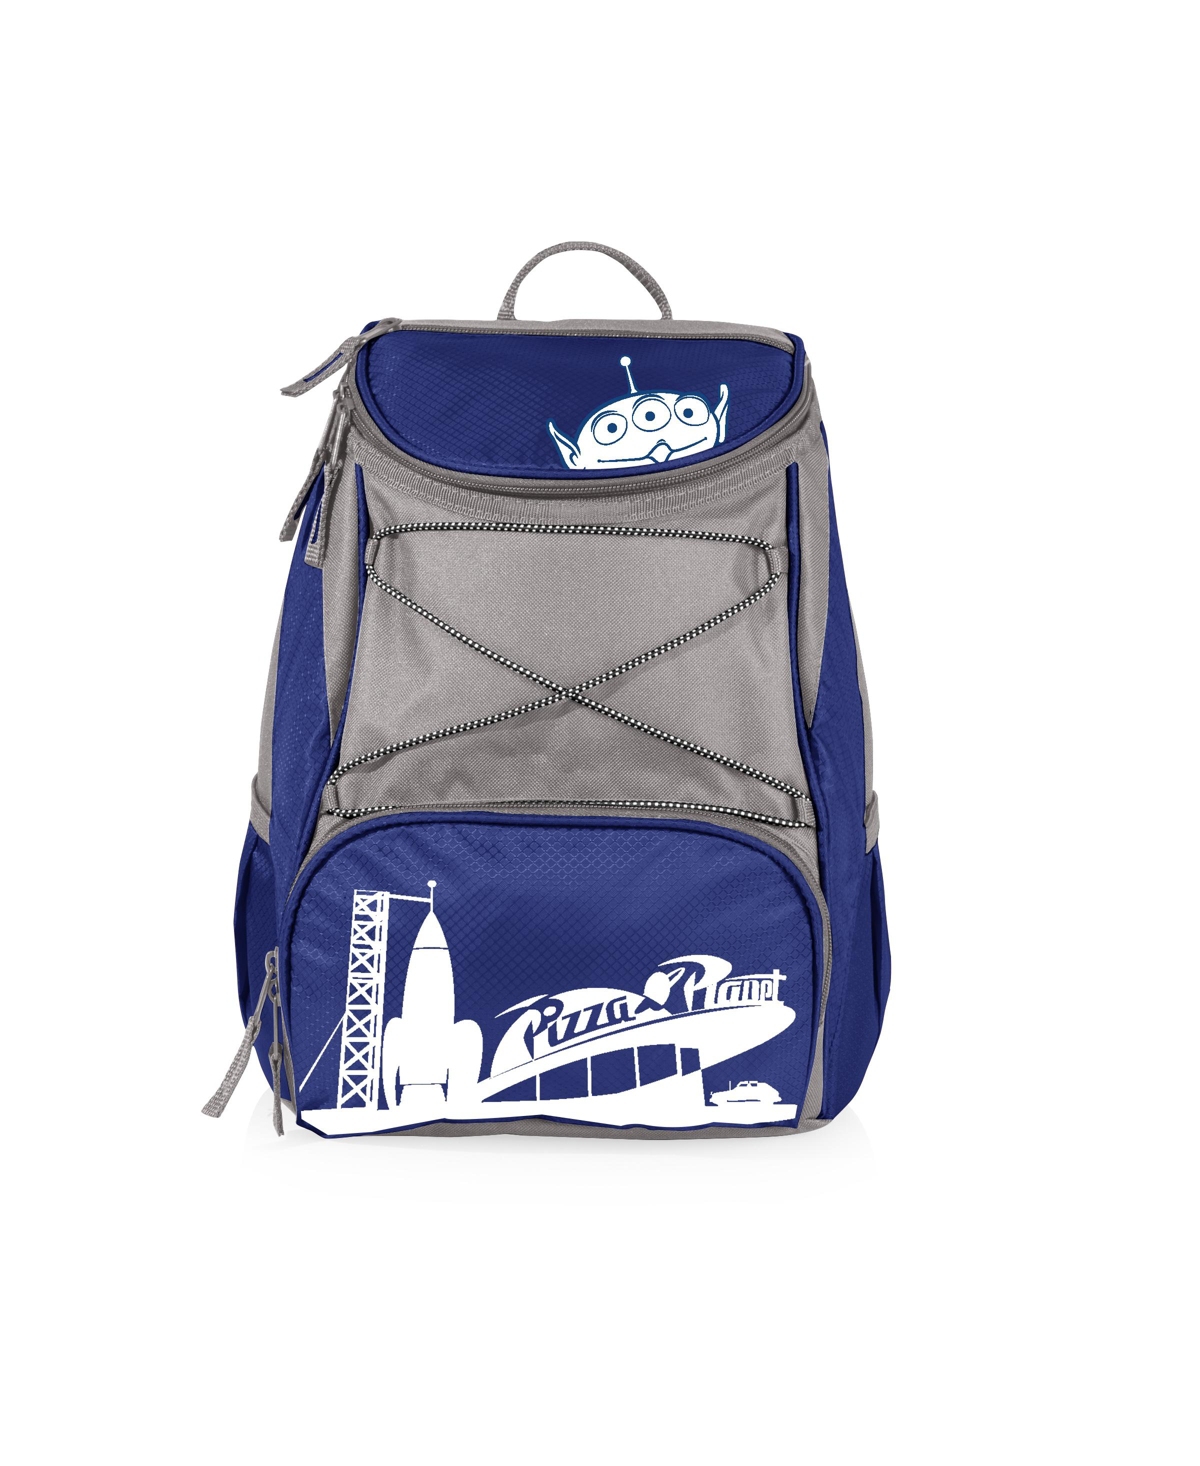 by Picnic Time Ptx Backpack Toy Story Pizza Planet Navy - Navy